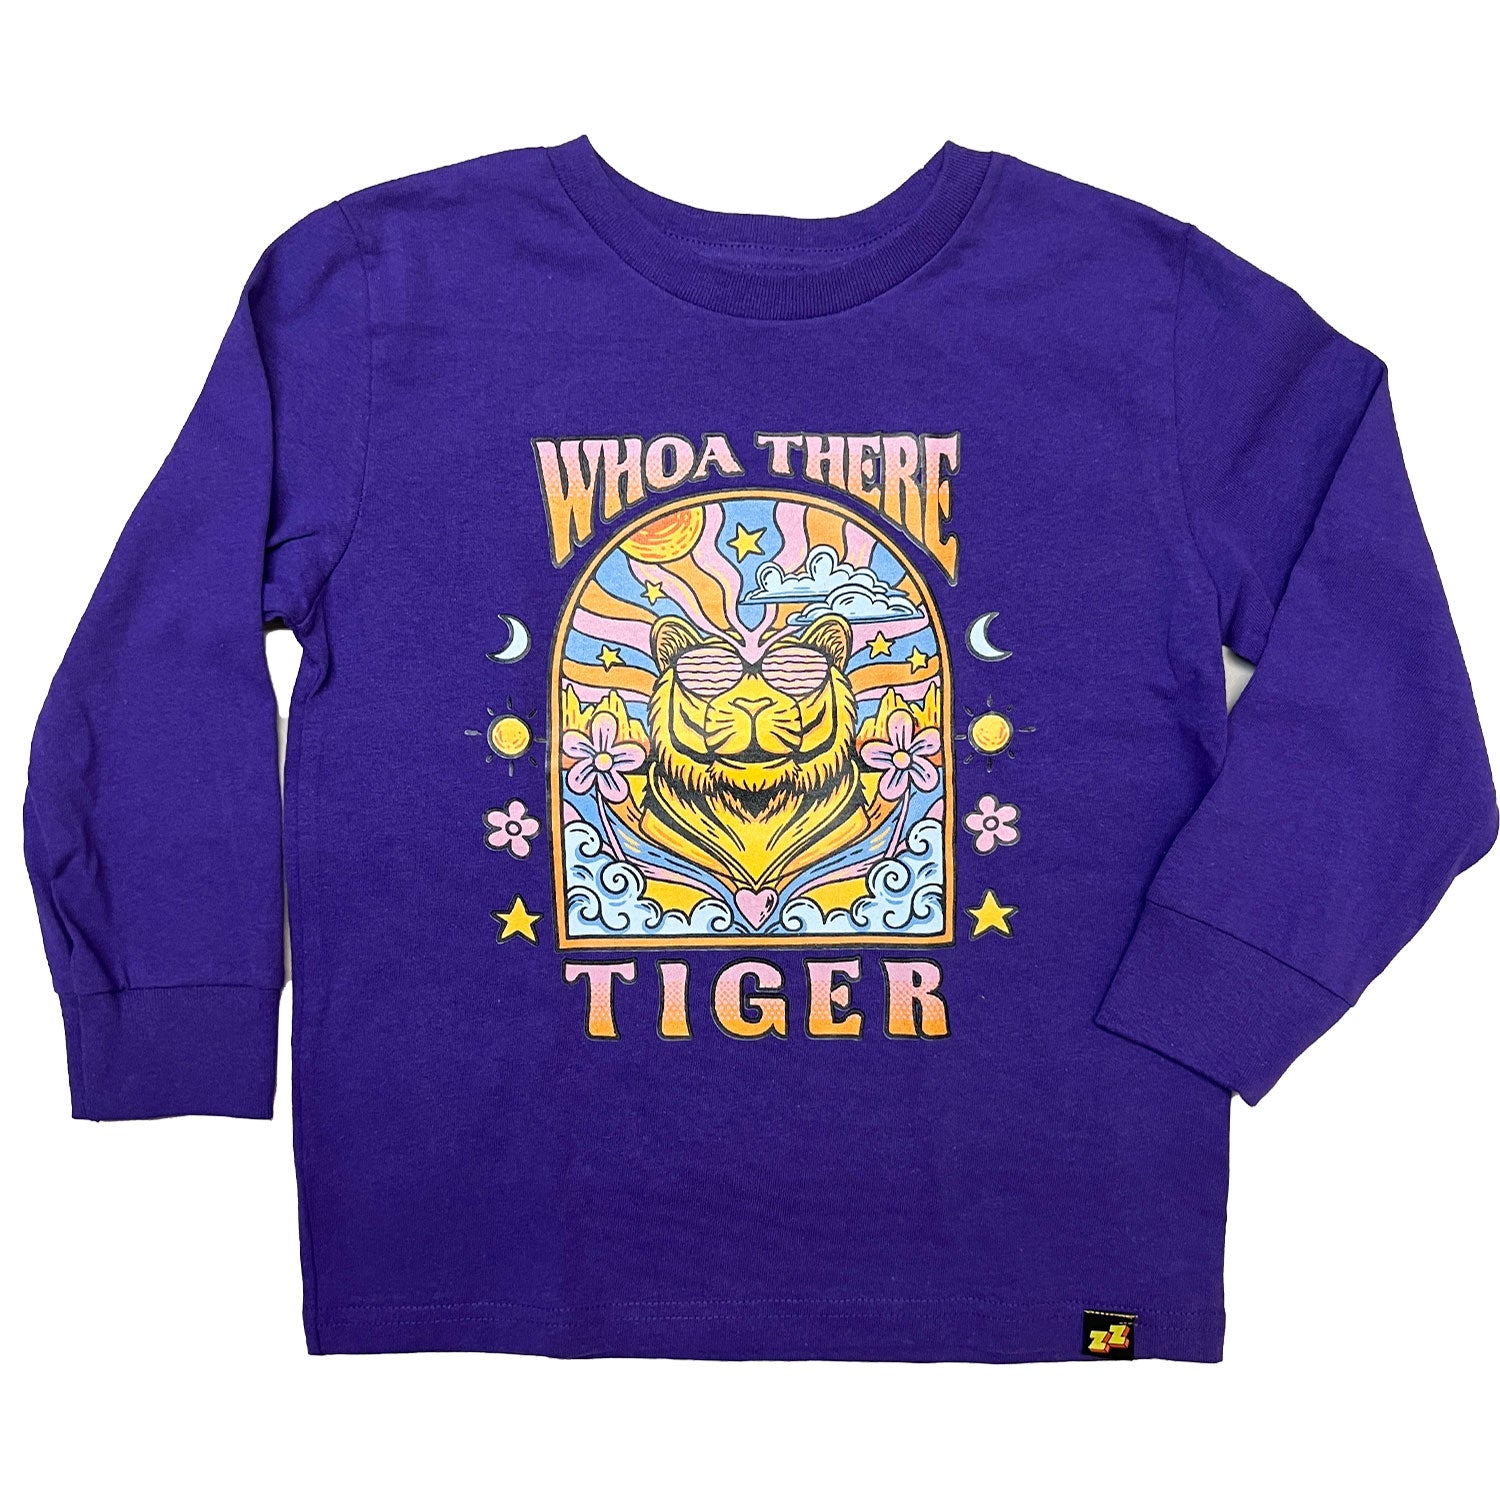 "Whoa There Tiger" Long Sleeve Tee | Kids' Graphic Tee | Sizes 2T-YXL